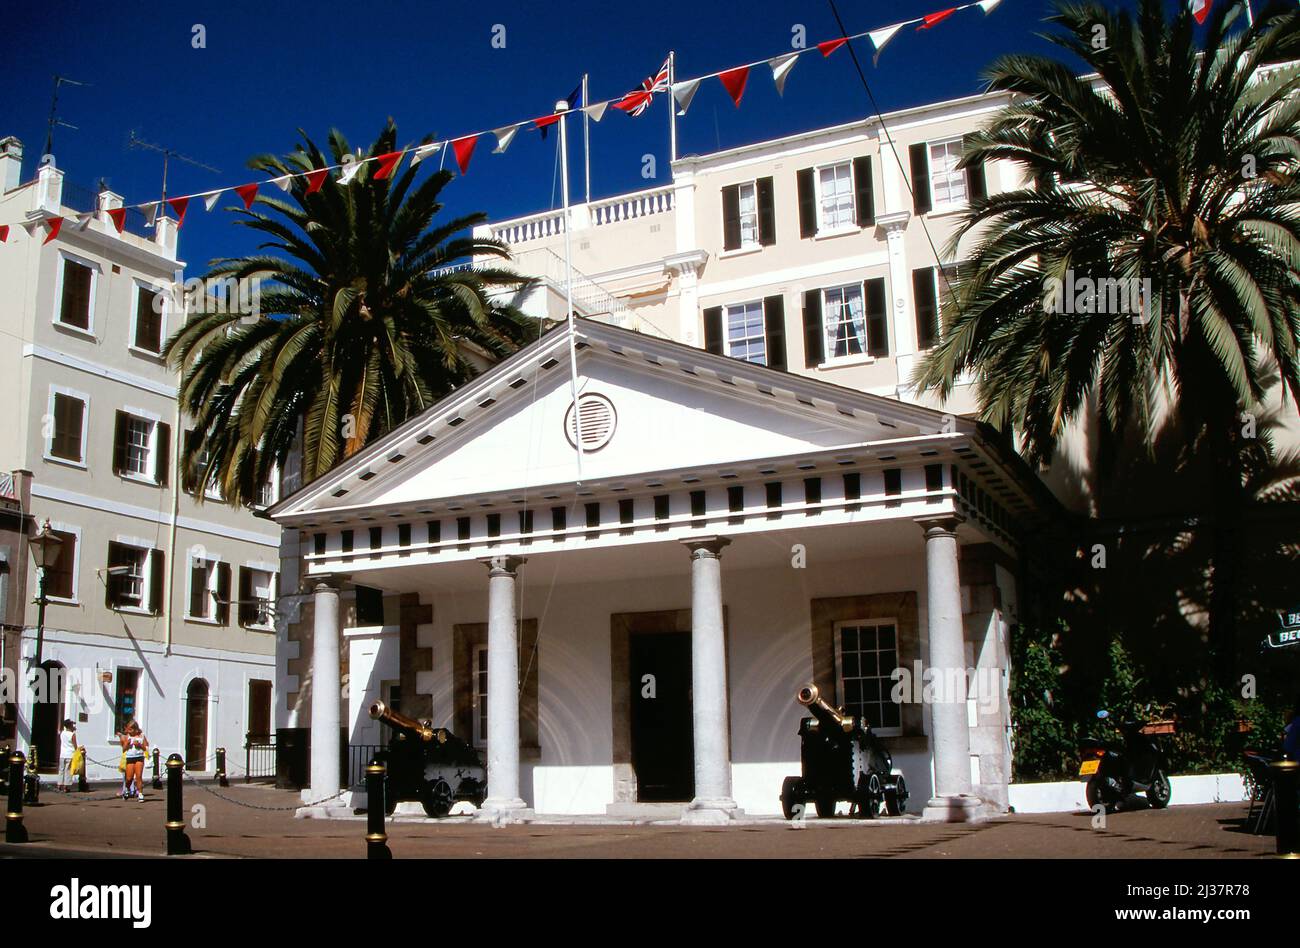 Gibraltar (British Overseas Territory). Facade of Her Majesty's Government headquarters in Gibraltar. Stock Photo